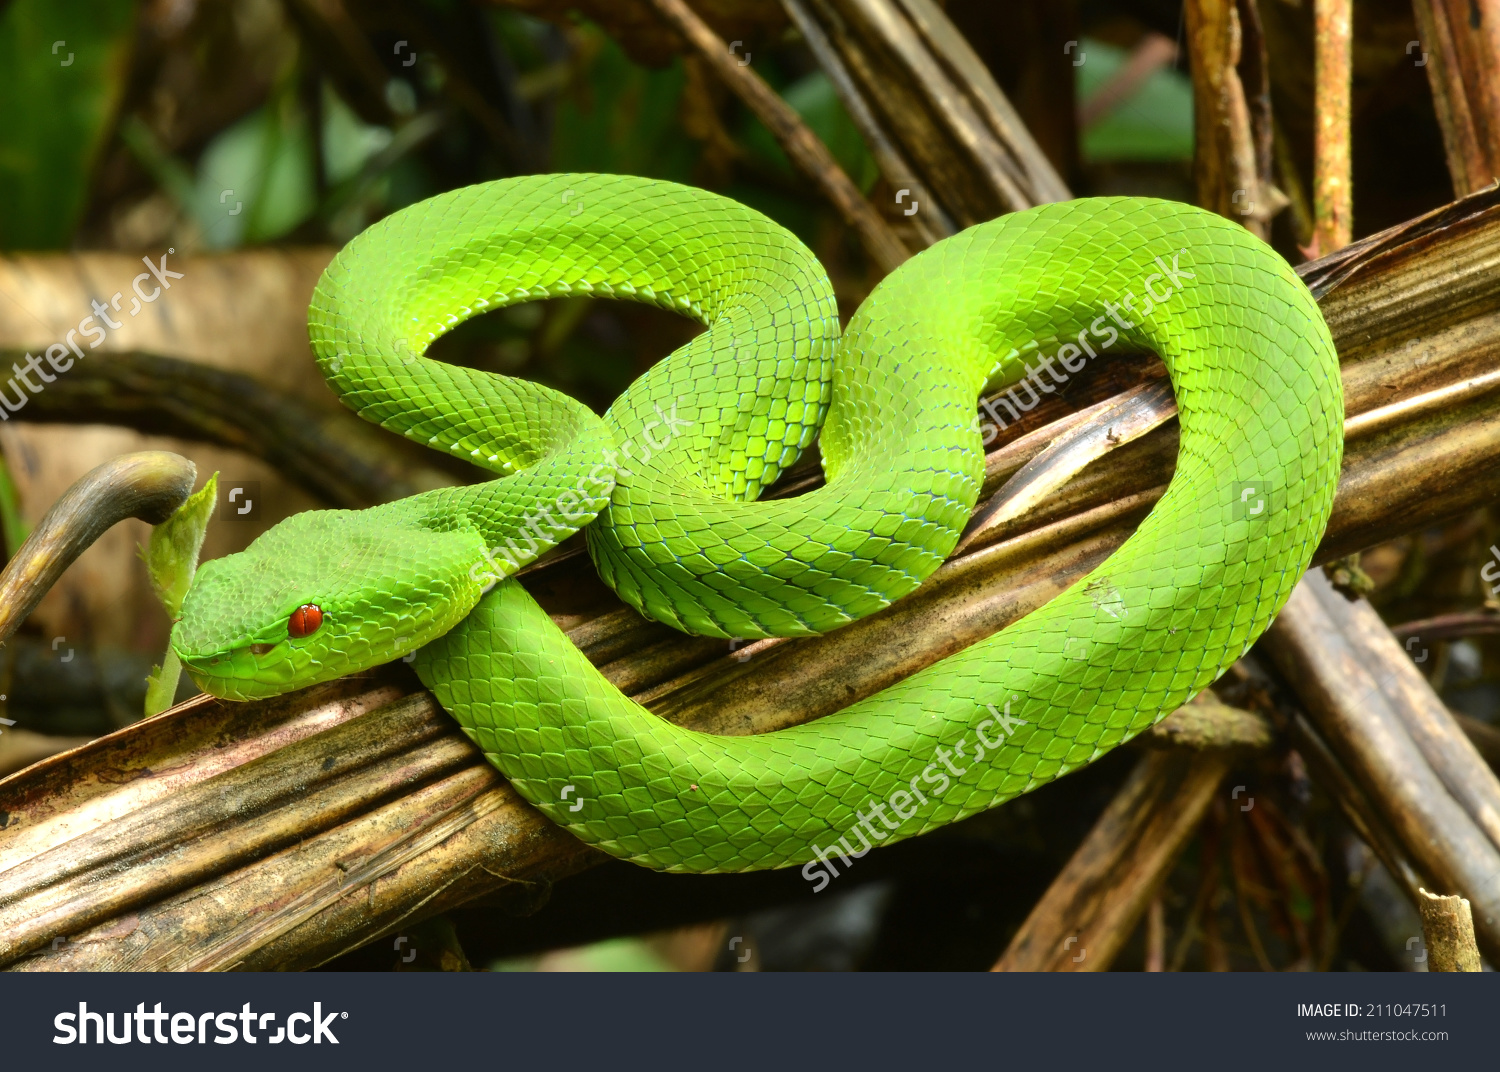 Green Pit Viper clipart #10, Download drawings